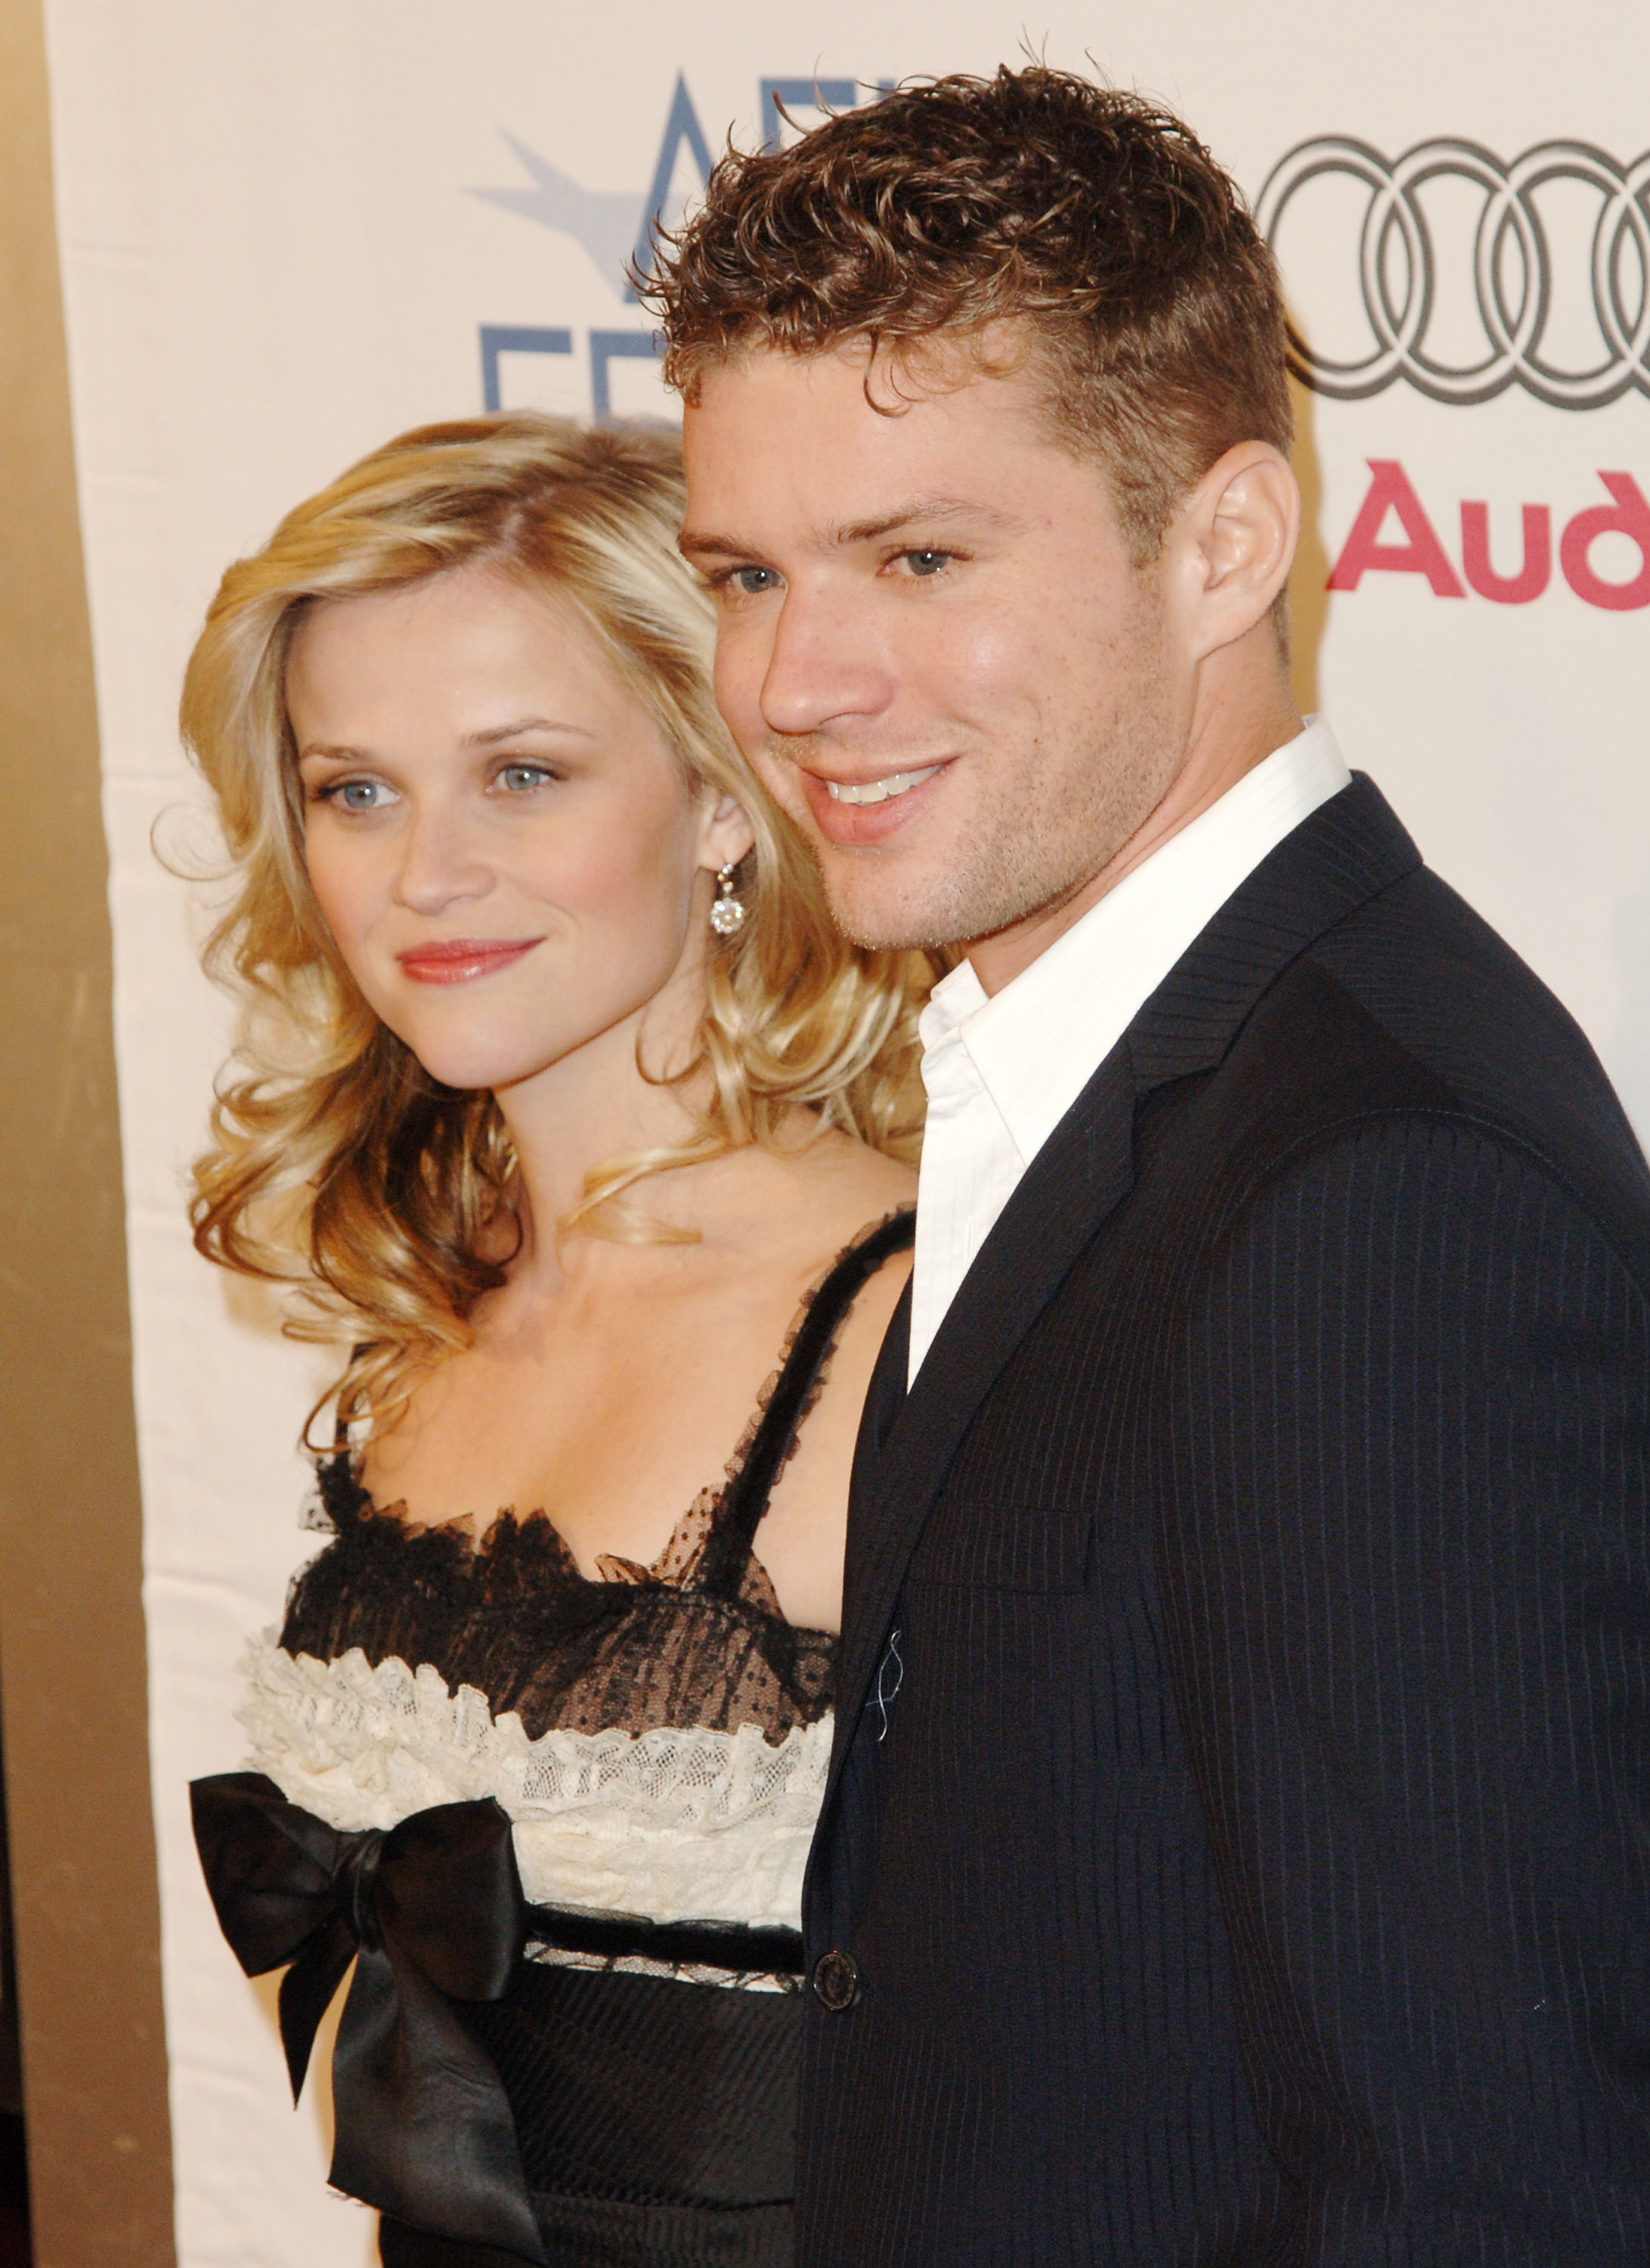 Reese Witherspoon and Ryan Phillippe during AFI Fest 2005 Opening Night Gala Presents "Walk the Line" Premiere - Arrivals in Hollywood, California on November 3, 2005 | Source: Getty Images